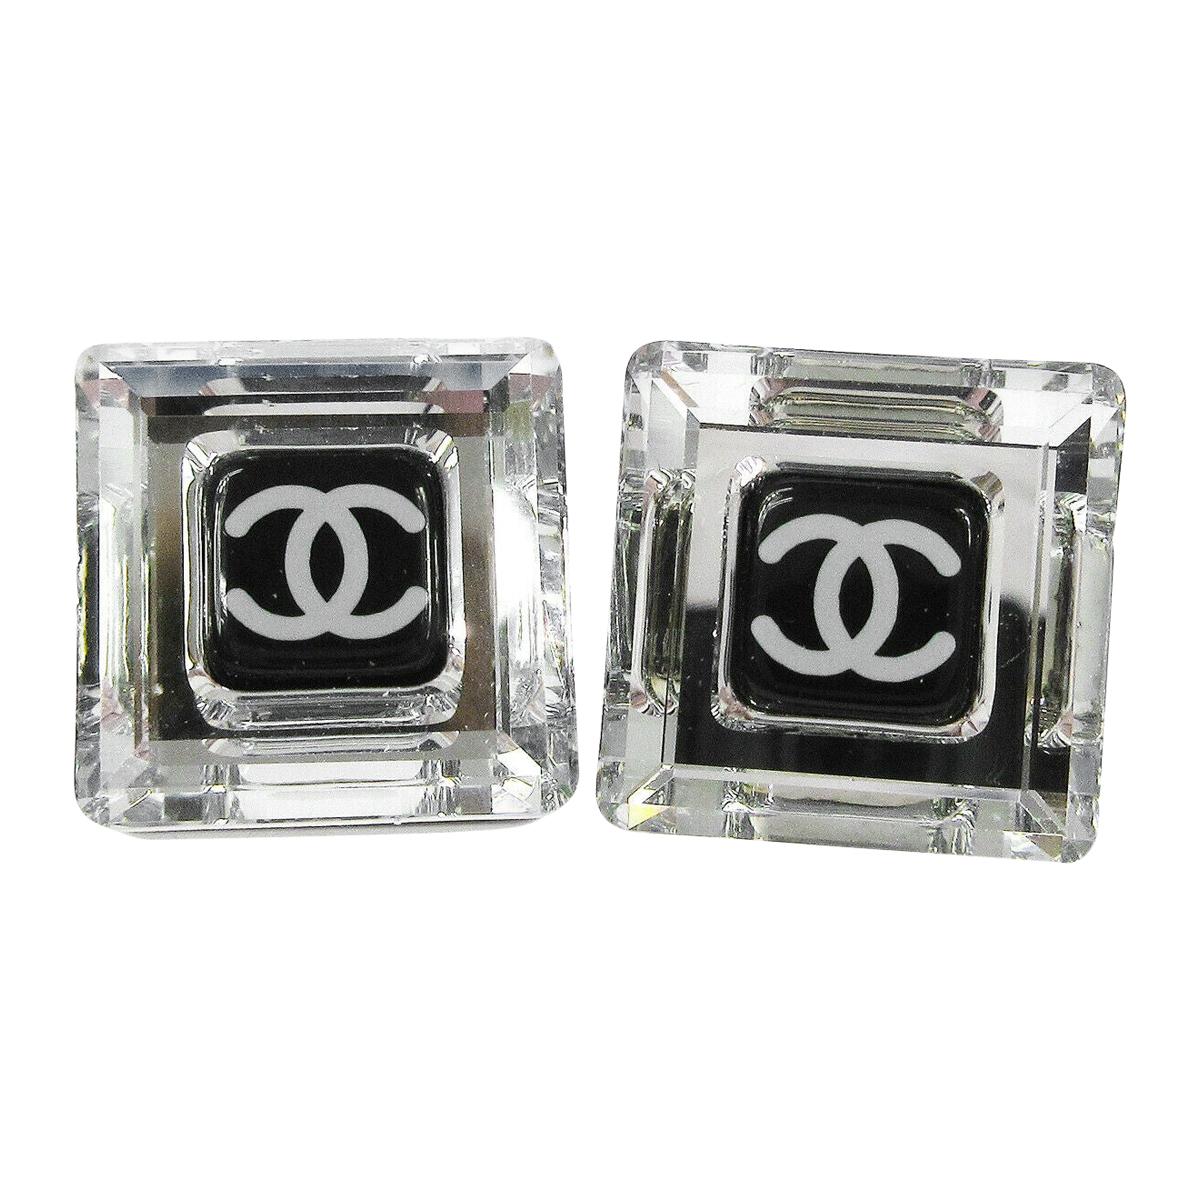 Chanel Clear Transparent Black Charm CC Evening Cube Stud Earrings in Box 

Plastic
Enamel
For pierced ears
Made in France
Measures 0.50